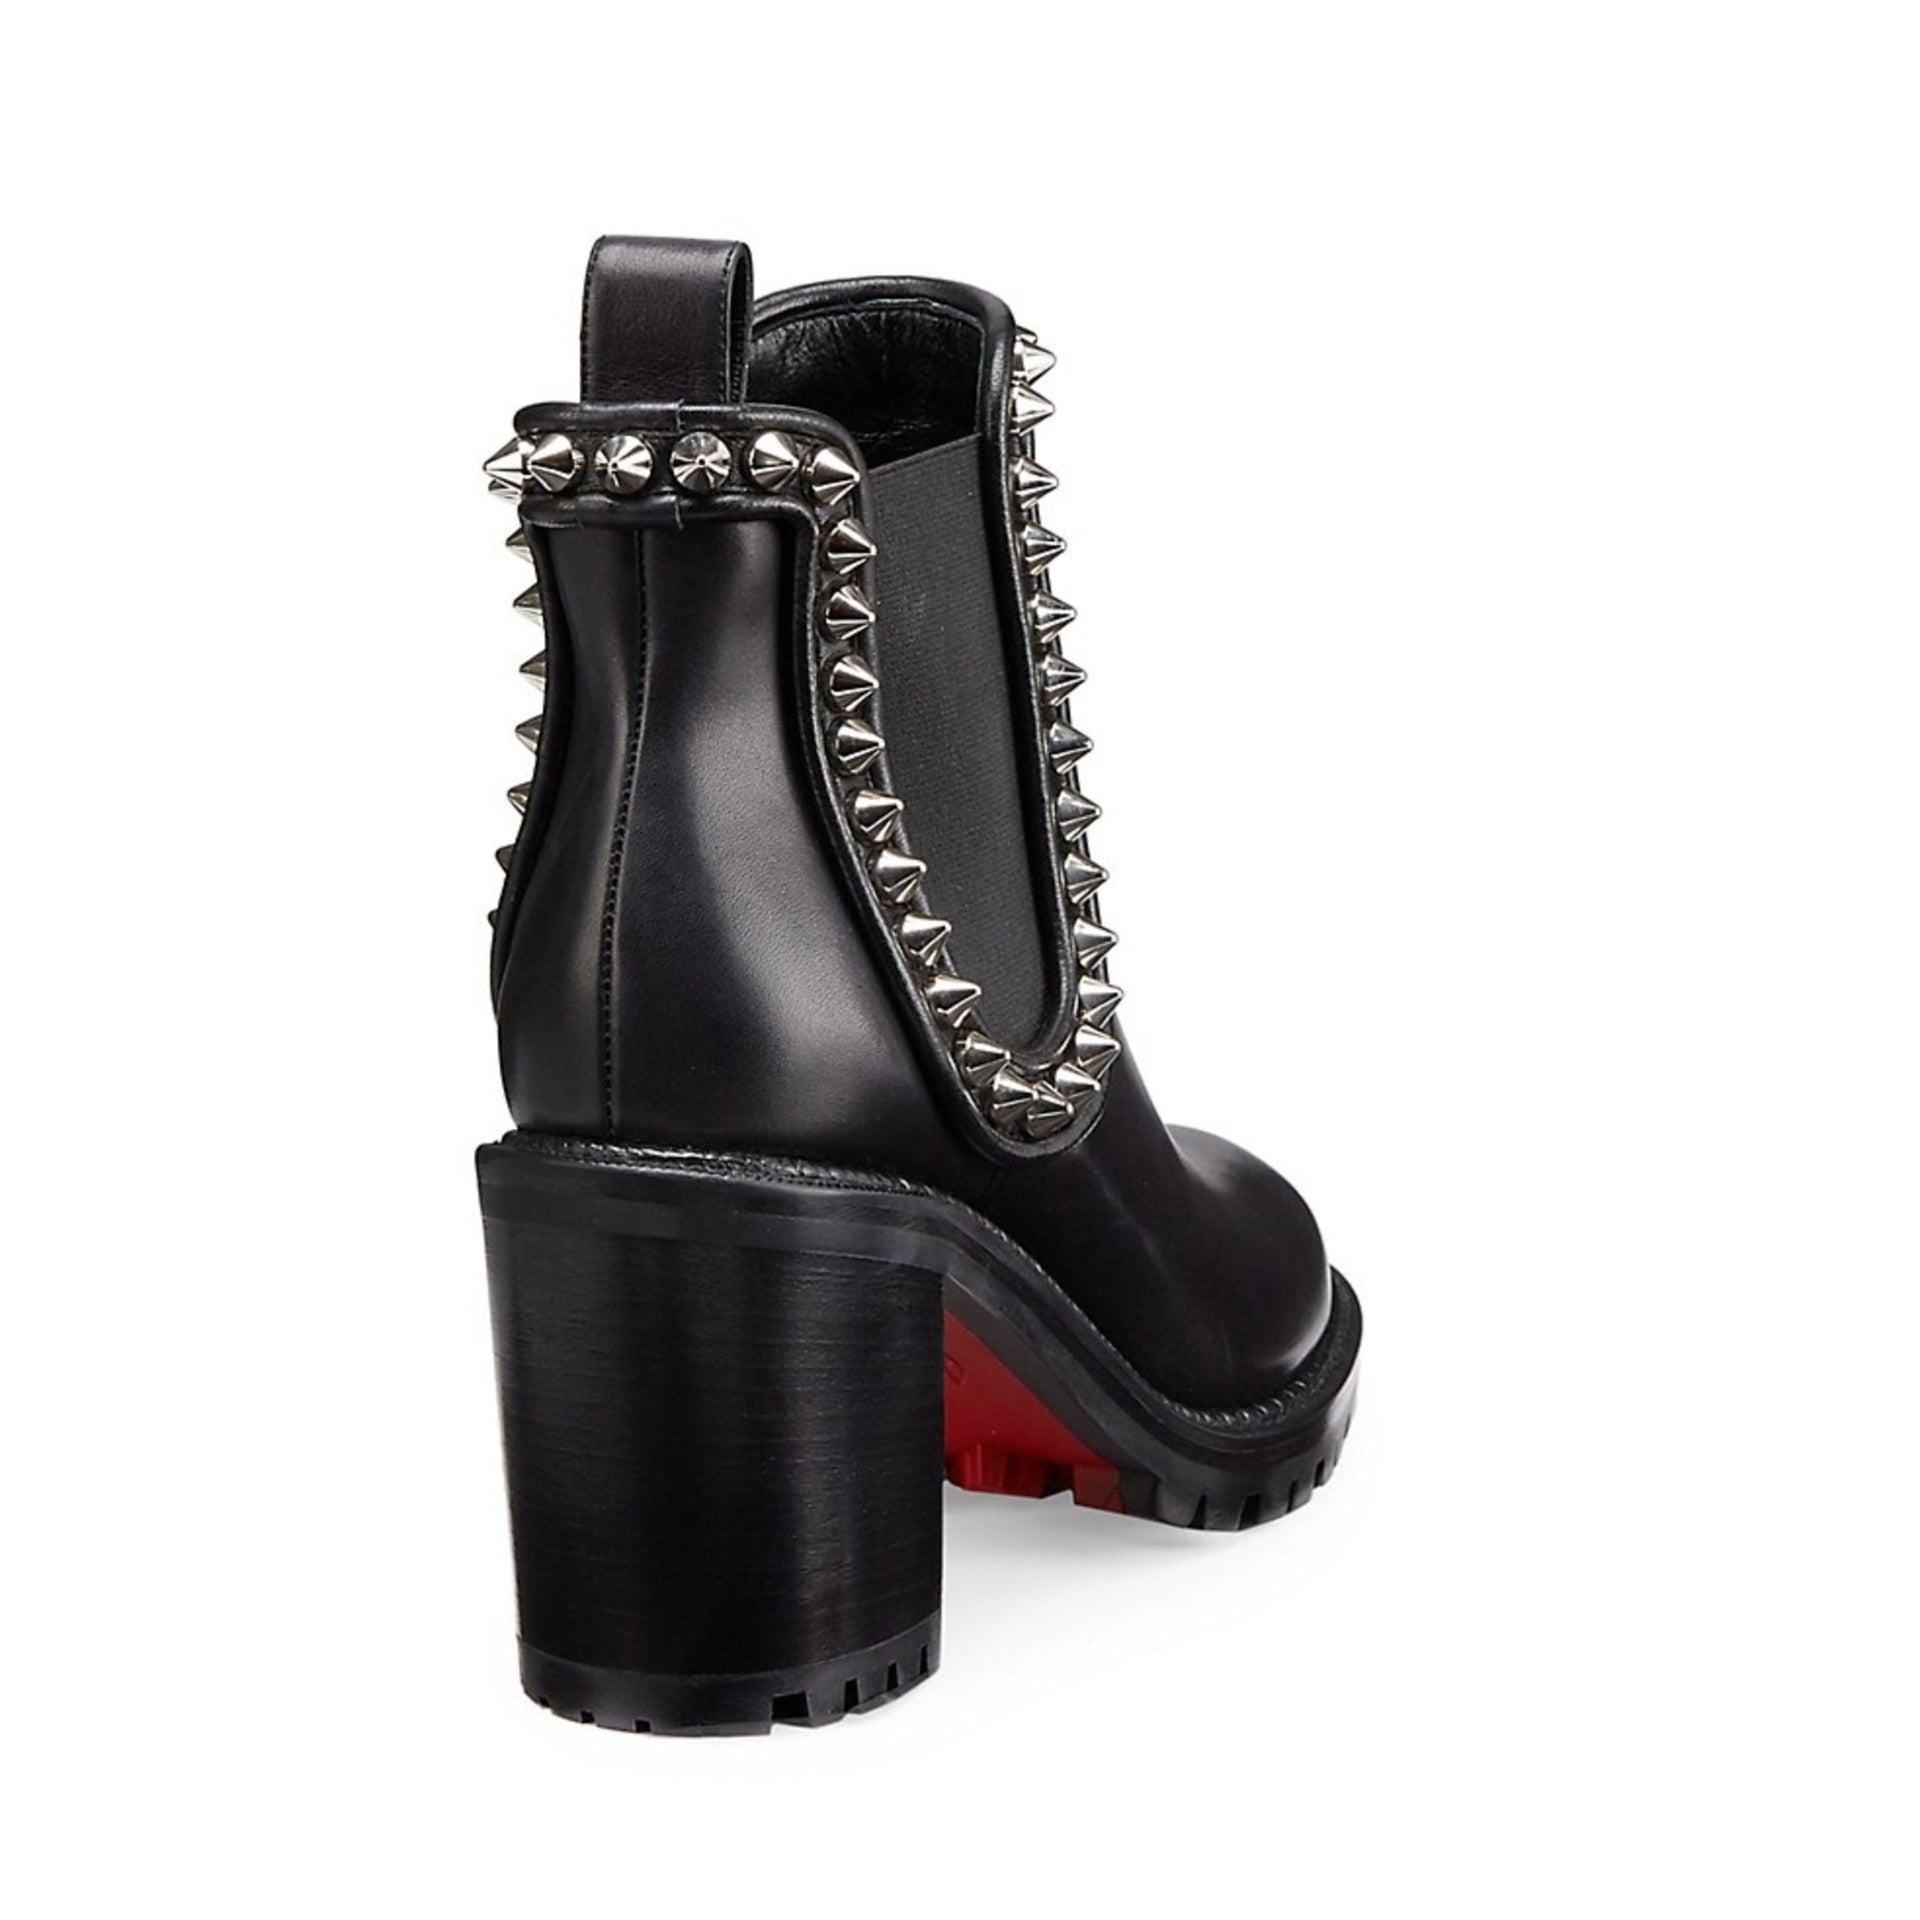 CHRISTIAN-LOUBOUTIN-OUTLET-SALE-Christian-Louboutin-Leather-Boots-Stiefel-Stiefeletten-ARCHIVE-COLLECTION-3.jpg